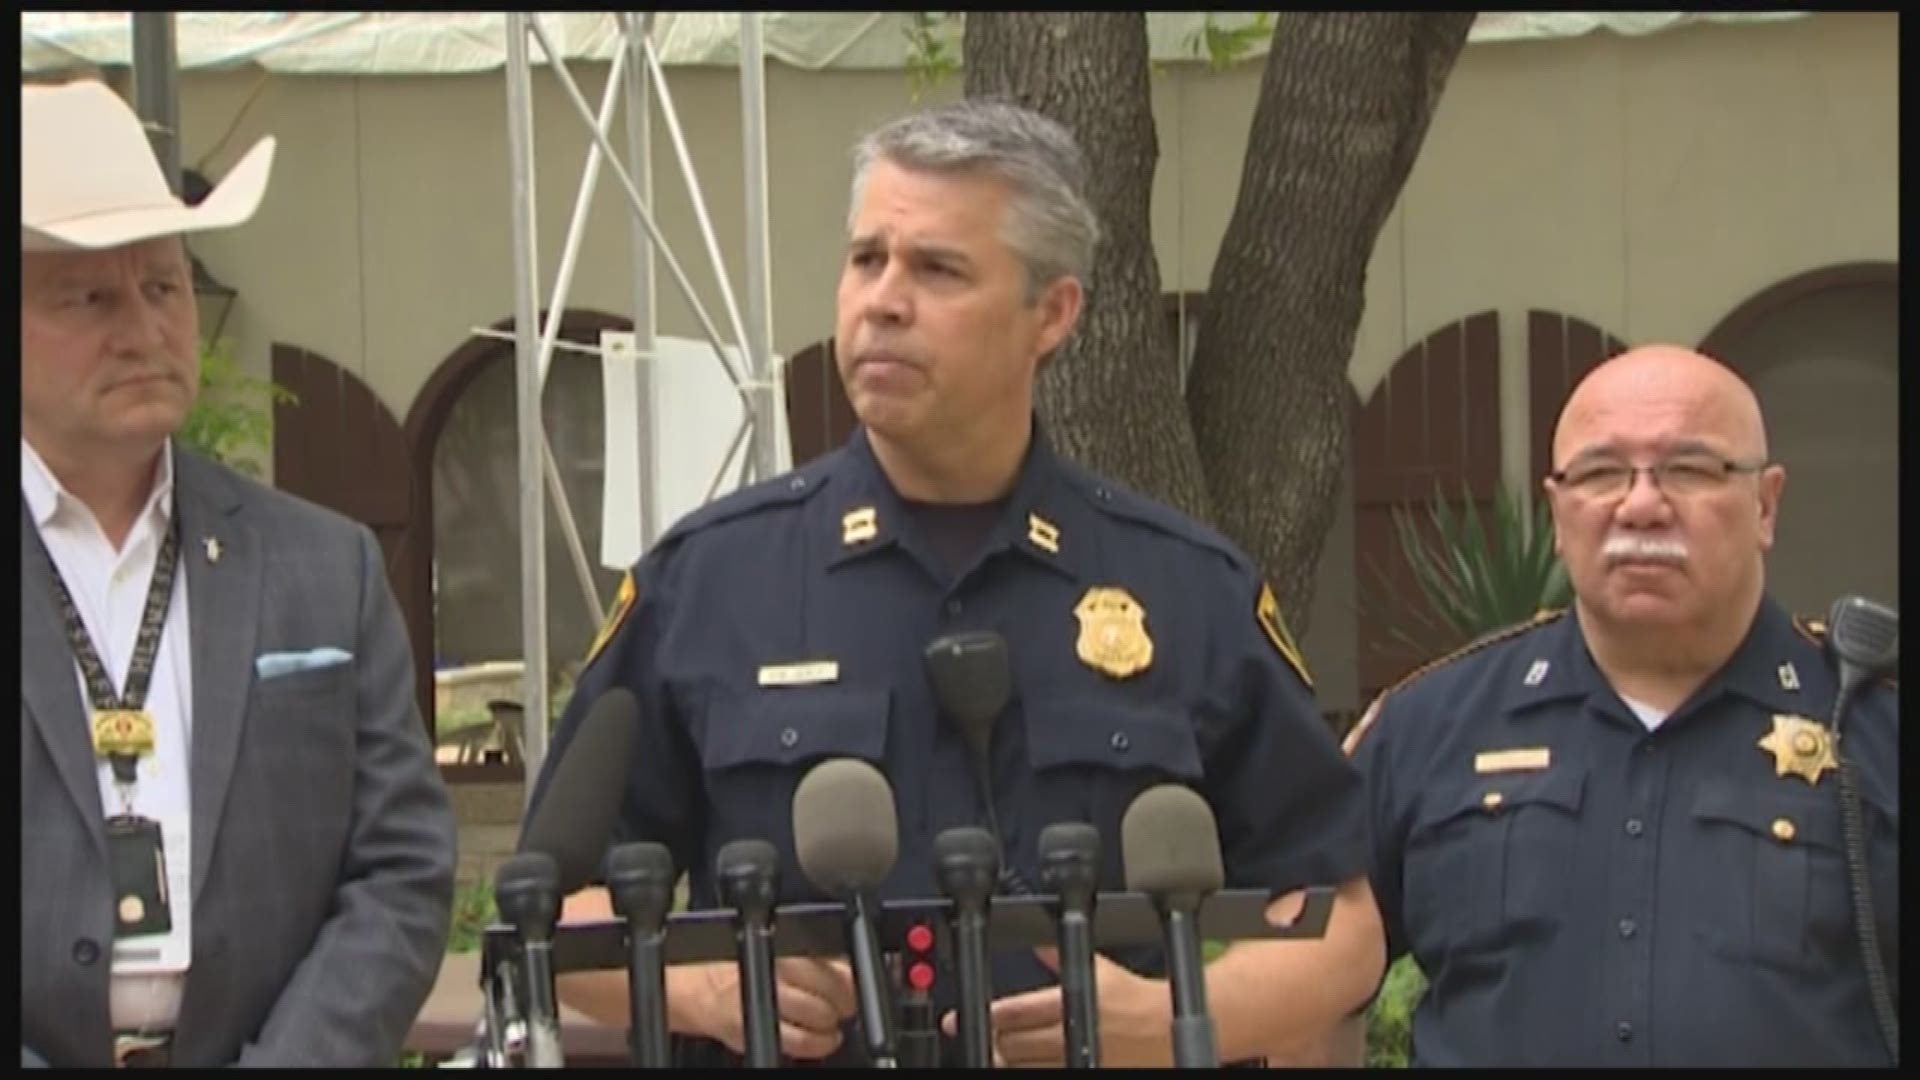 HPD confirms that they found a spent shell casing on the grounds of RodeoHouston.